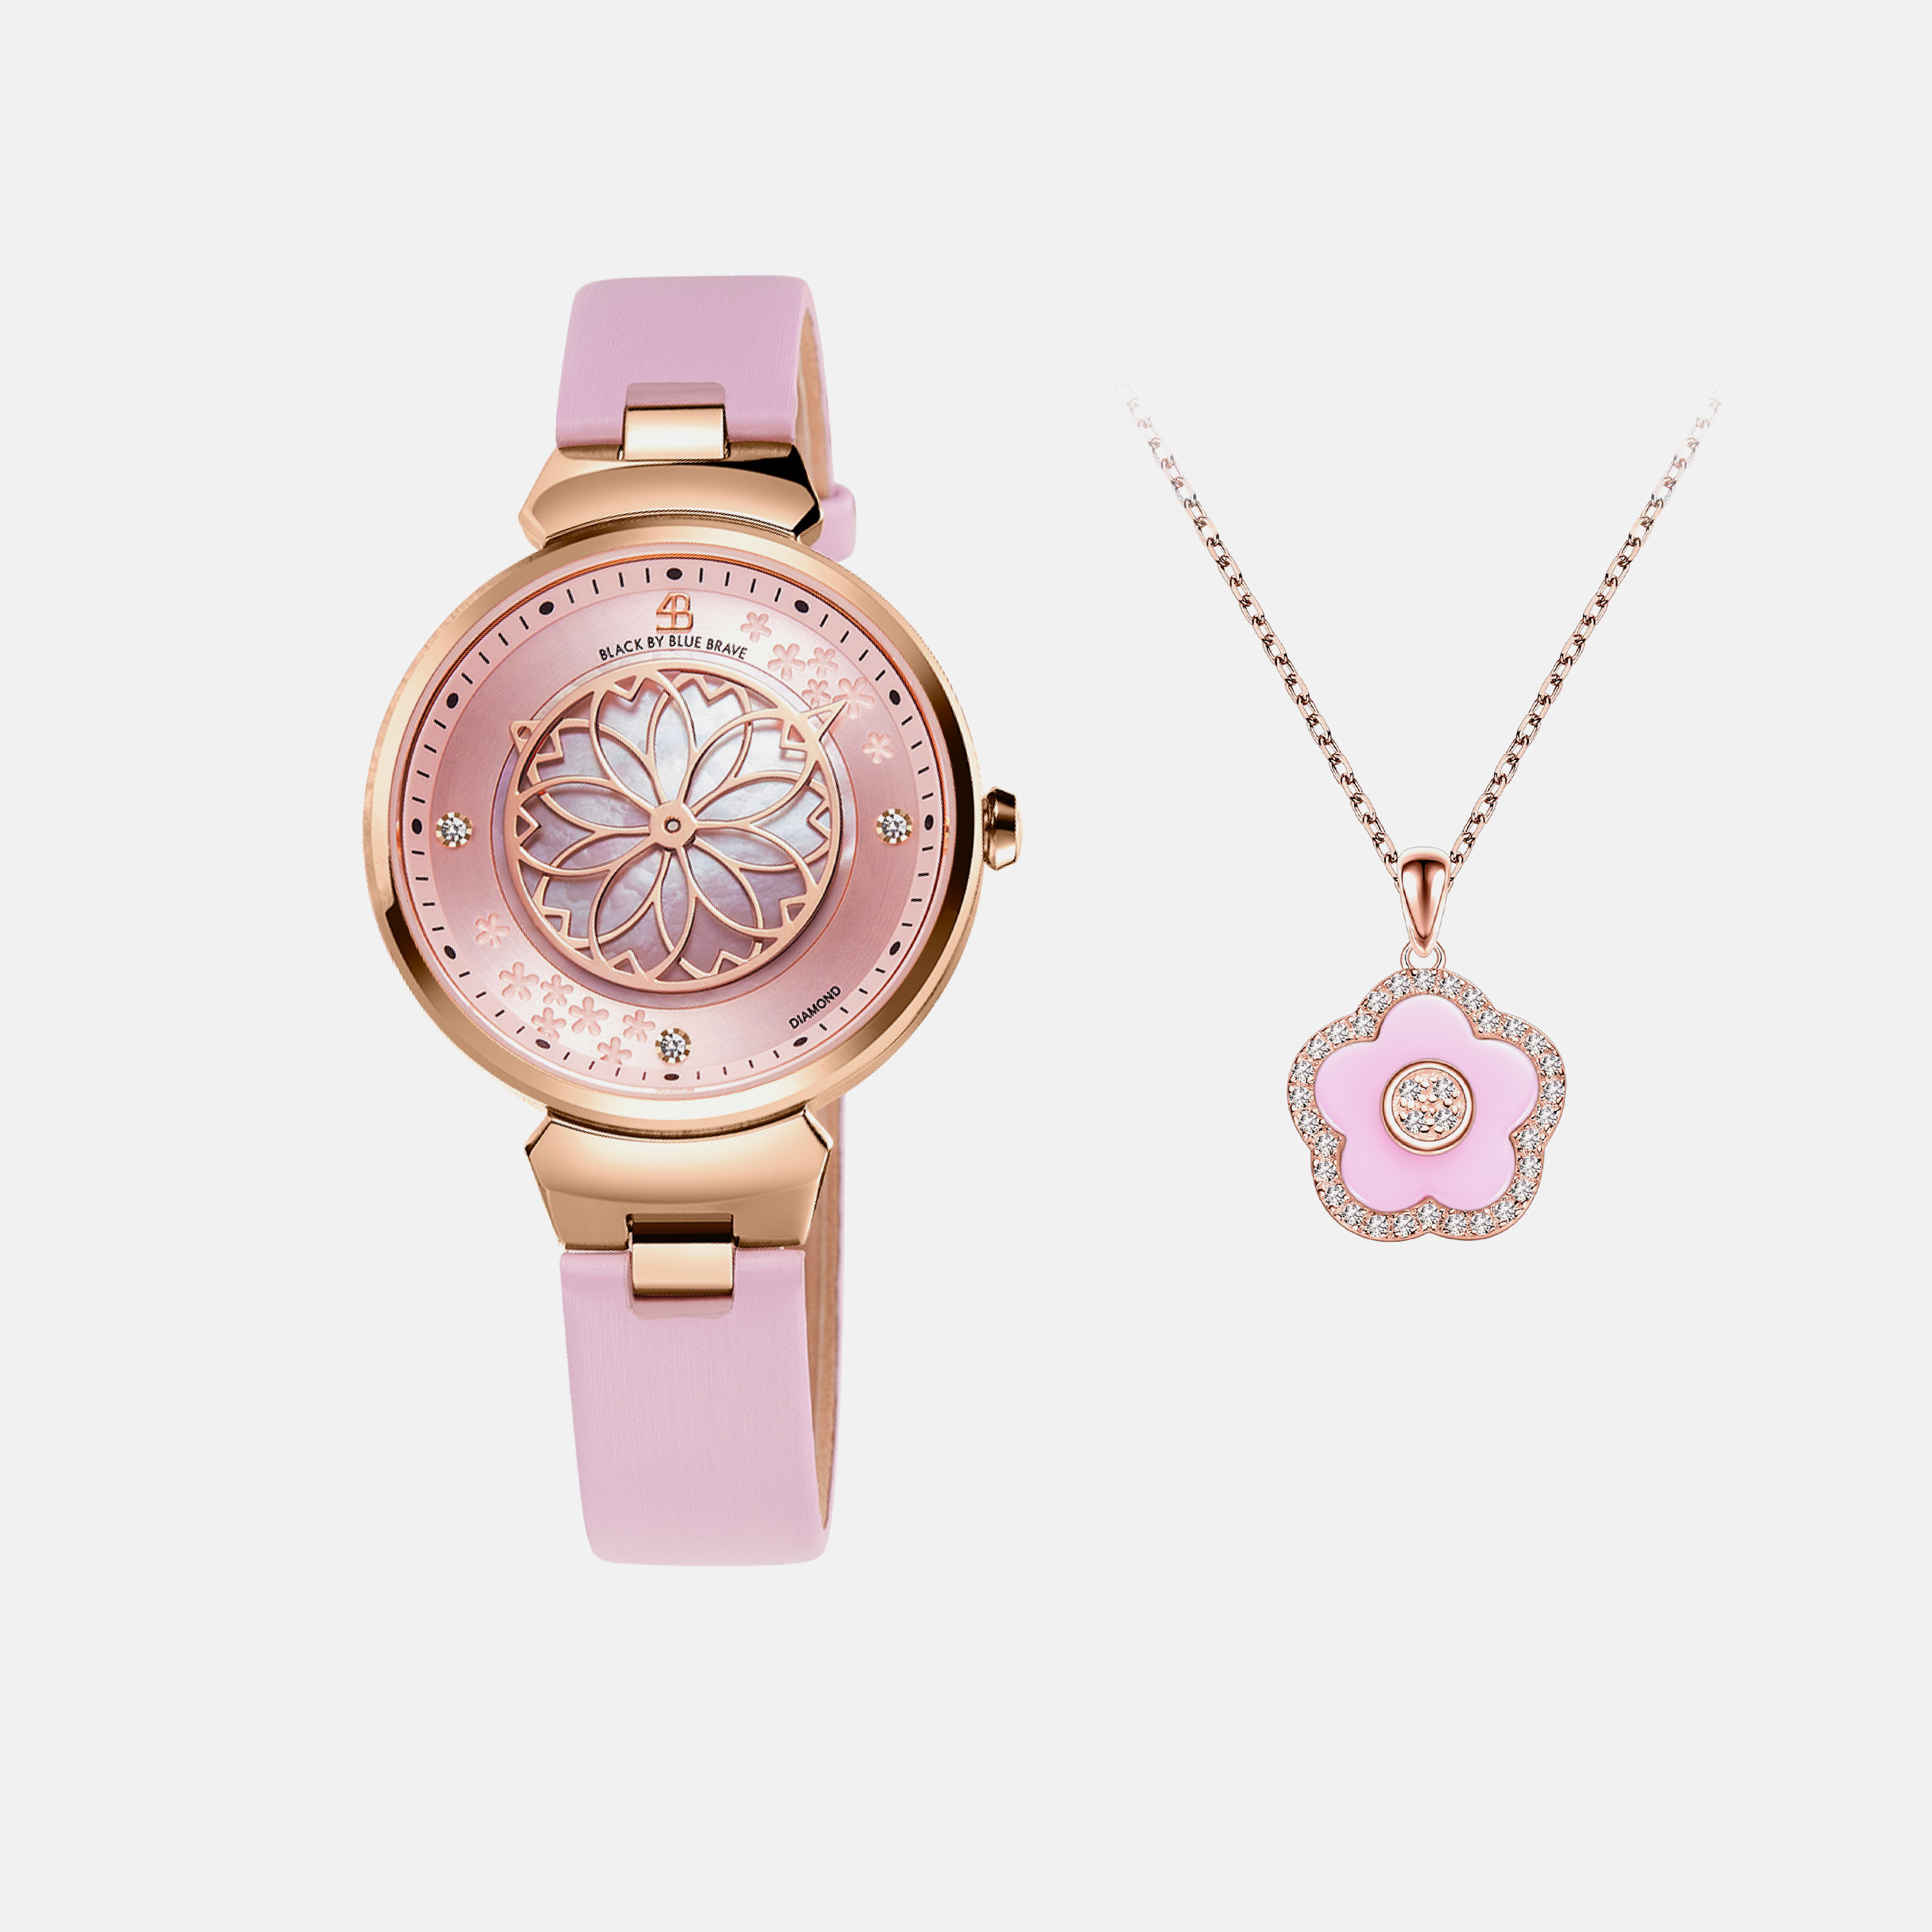 PINK CHERRY BLOSSOM WATCH WITH FLOWER CERAMIC NECKLACE